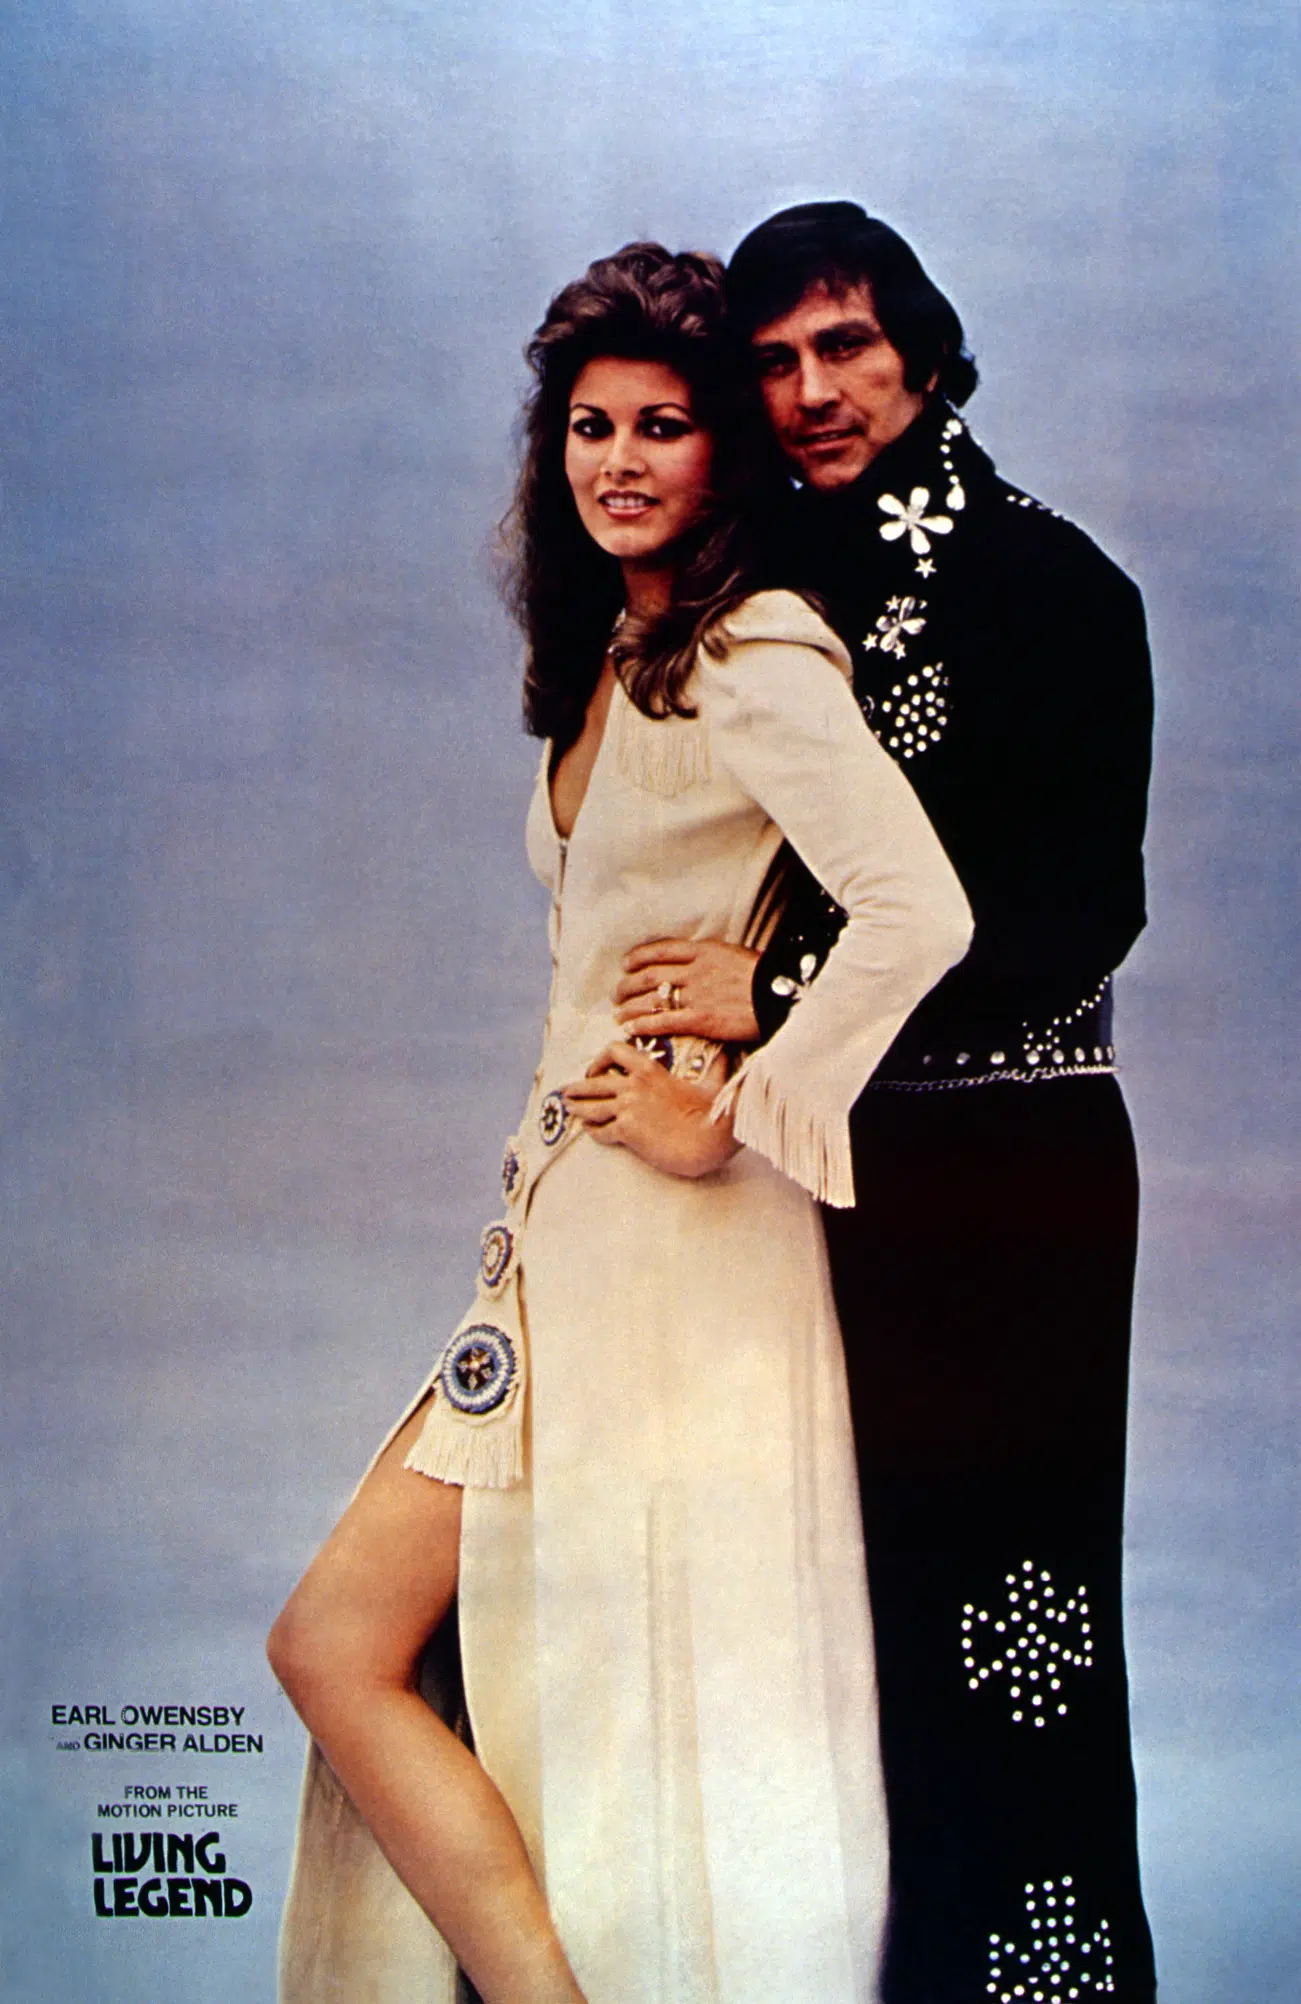 LIVING LEGEND: THE KING OF ROCK AND ROLL, US poster, from left: Ginger Alden, Earl Owensby, 1980